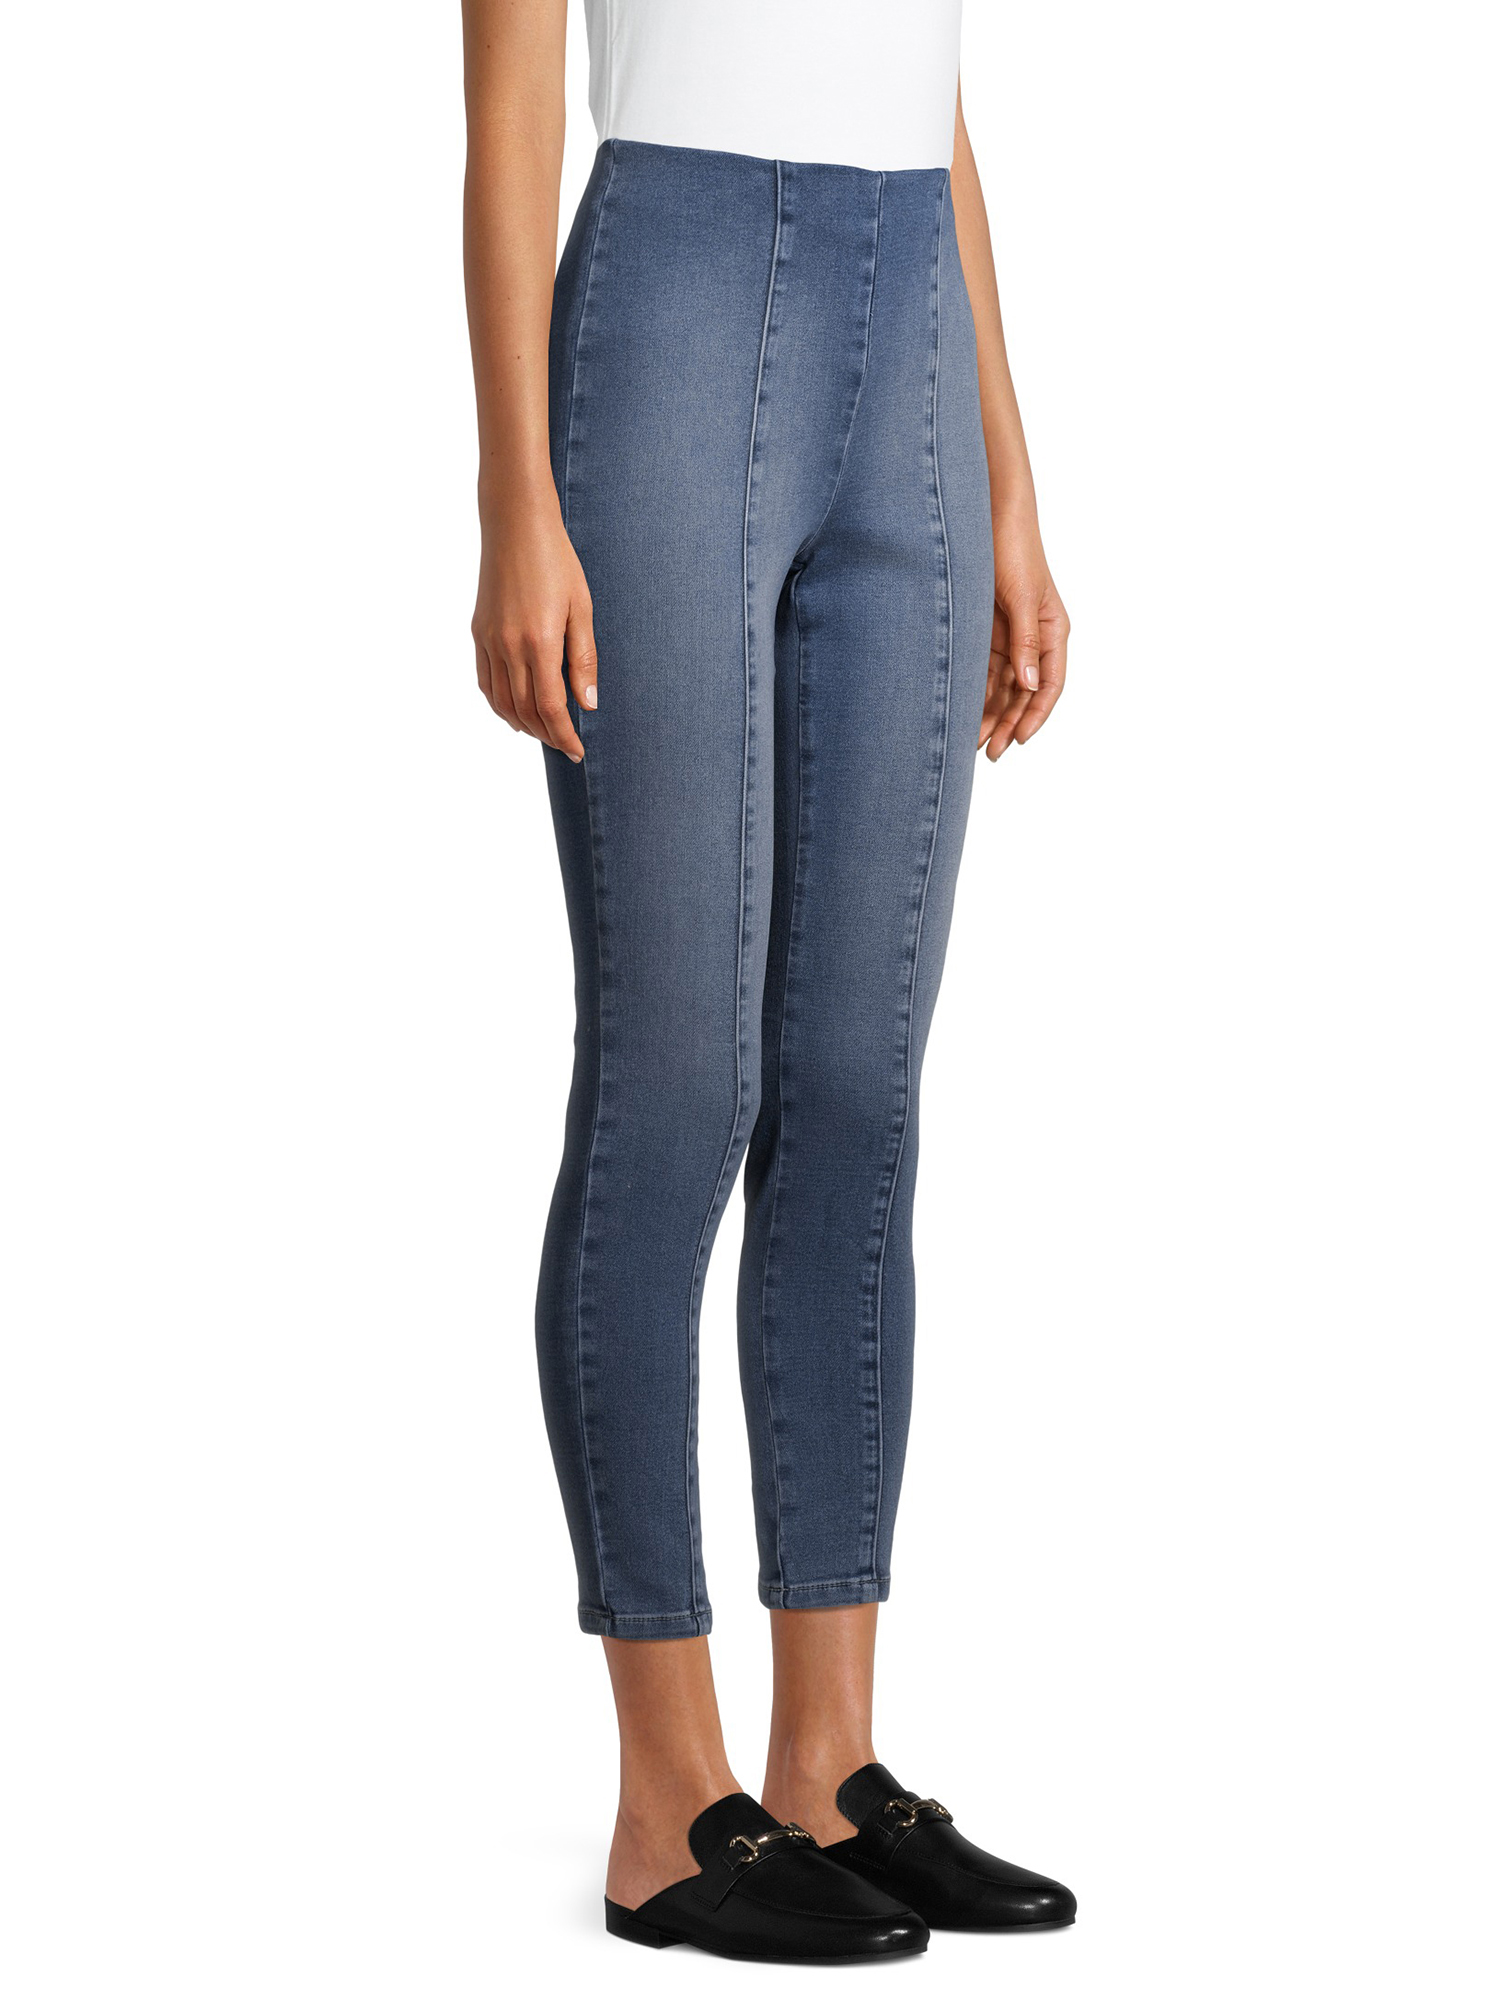 Time and Tru Women's Pull On Seamed Front Skinny Jeans - image 5 of 6